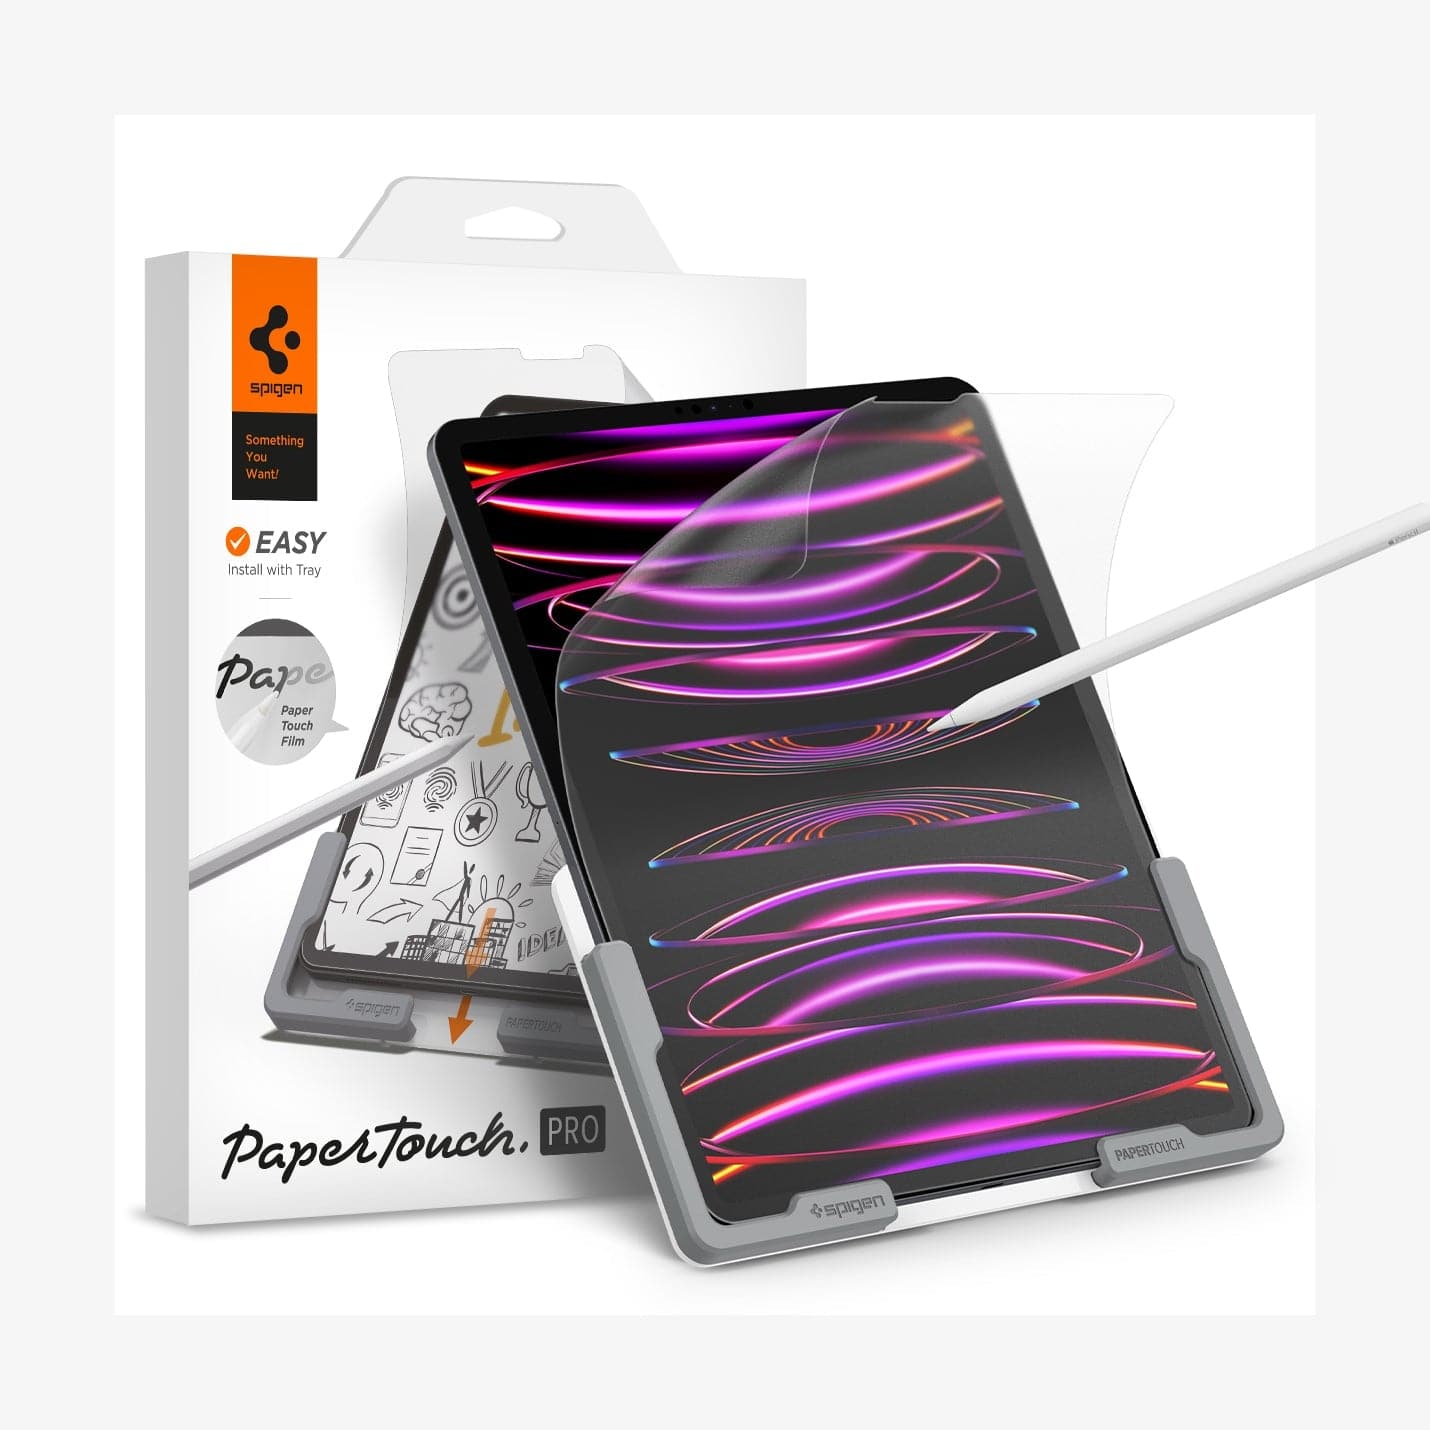 AFL05859 - iPad Pro 12.9" (2022/2021) Screen Protector Paper Touch Pro showing the device, screen protector, pencil in front of screen and packaging